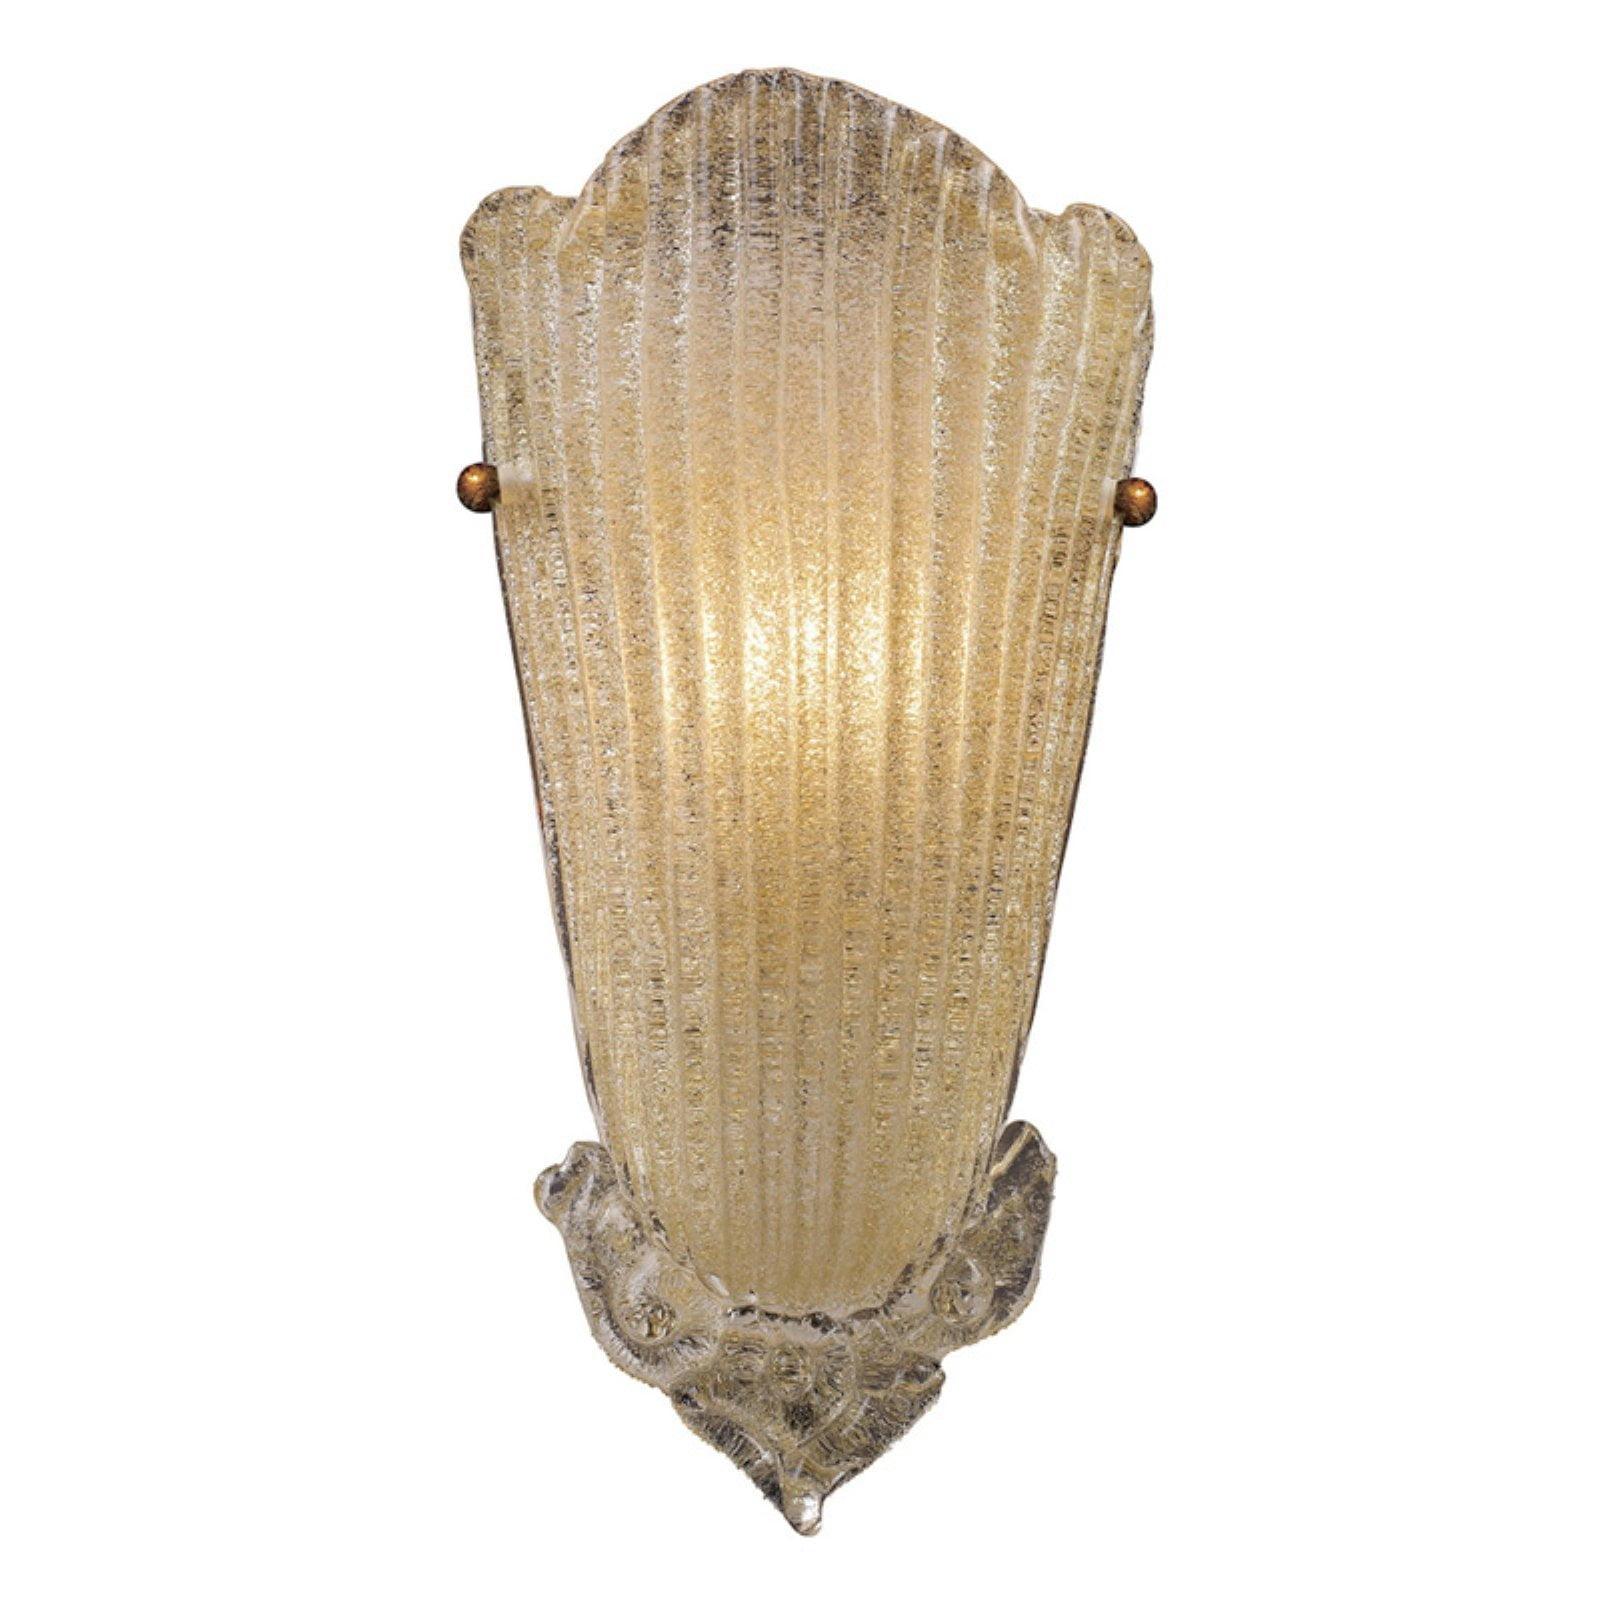 Antique Gold Leaf Hand-Worked Glass 1-Light Sconce